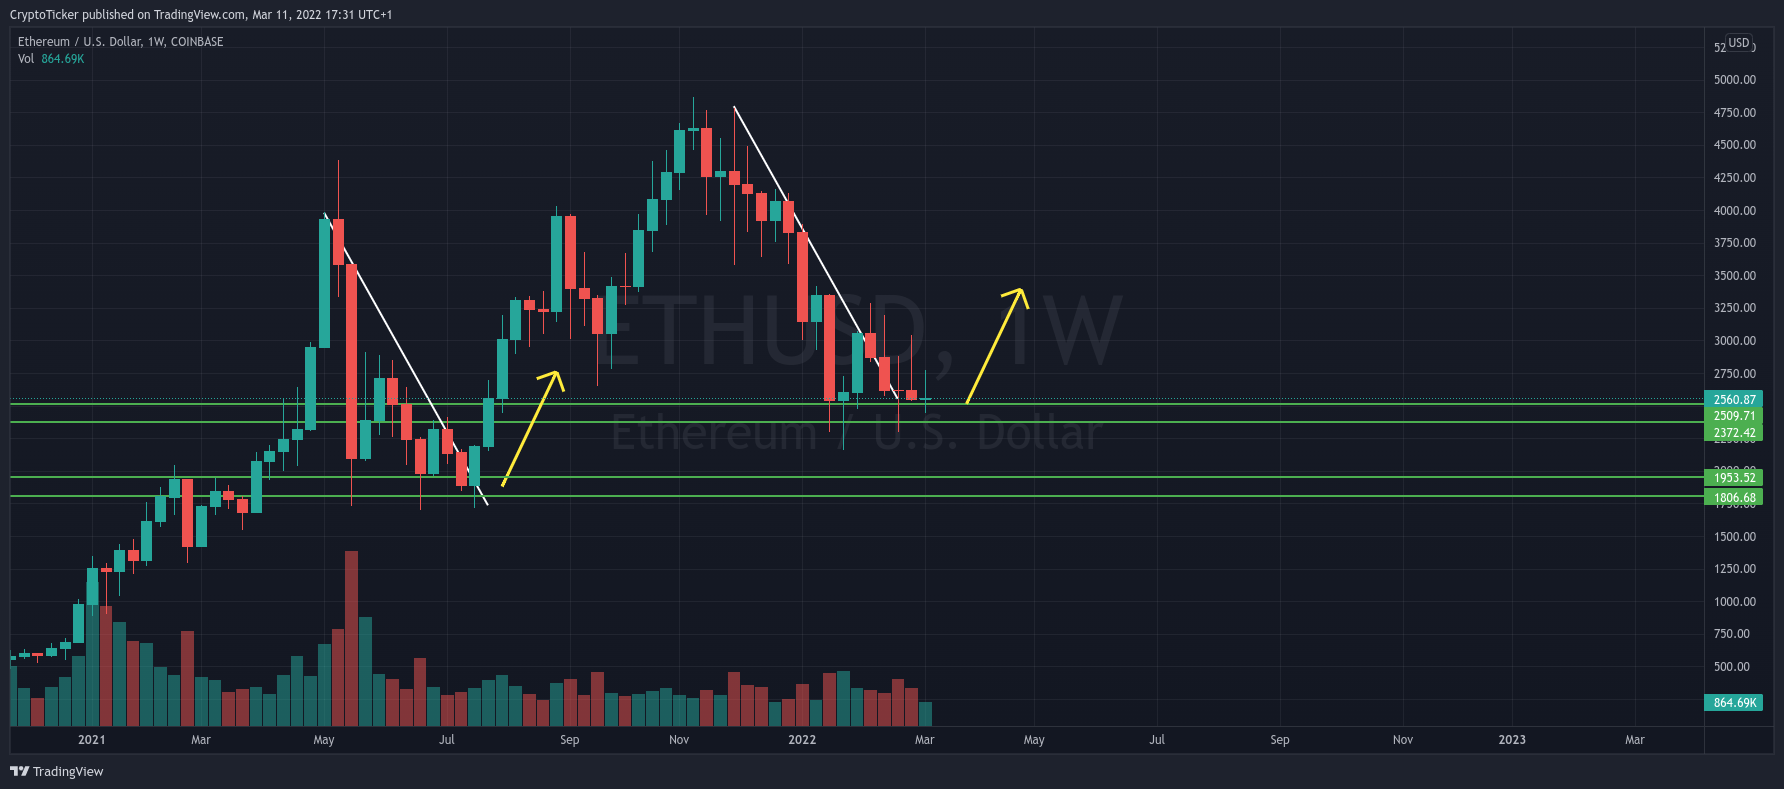 ETH/USD 1-week chart showing the repeating pattern of Ethereum price